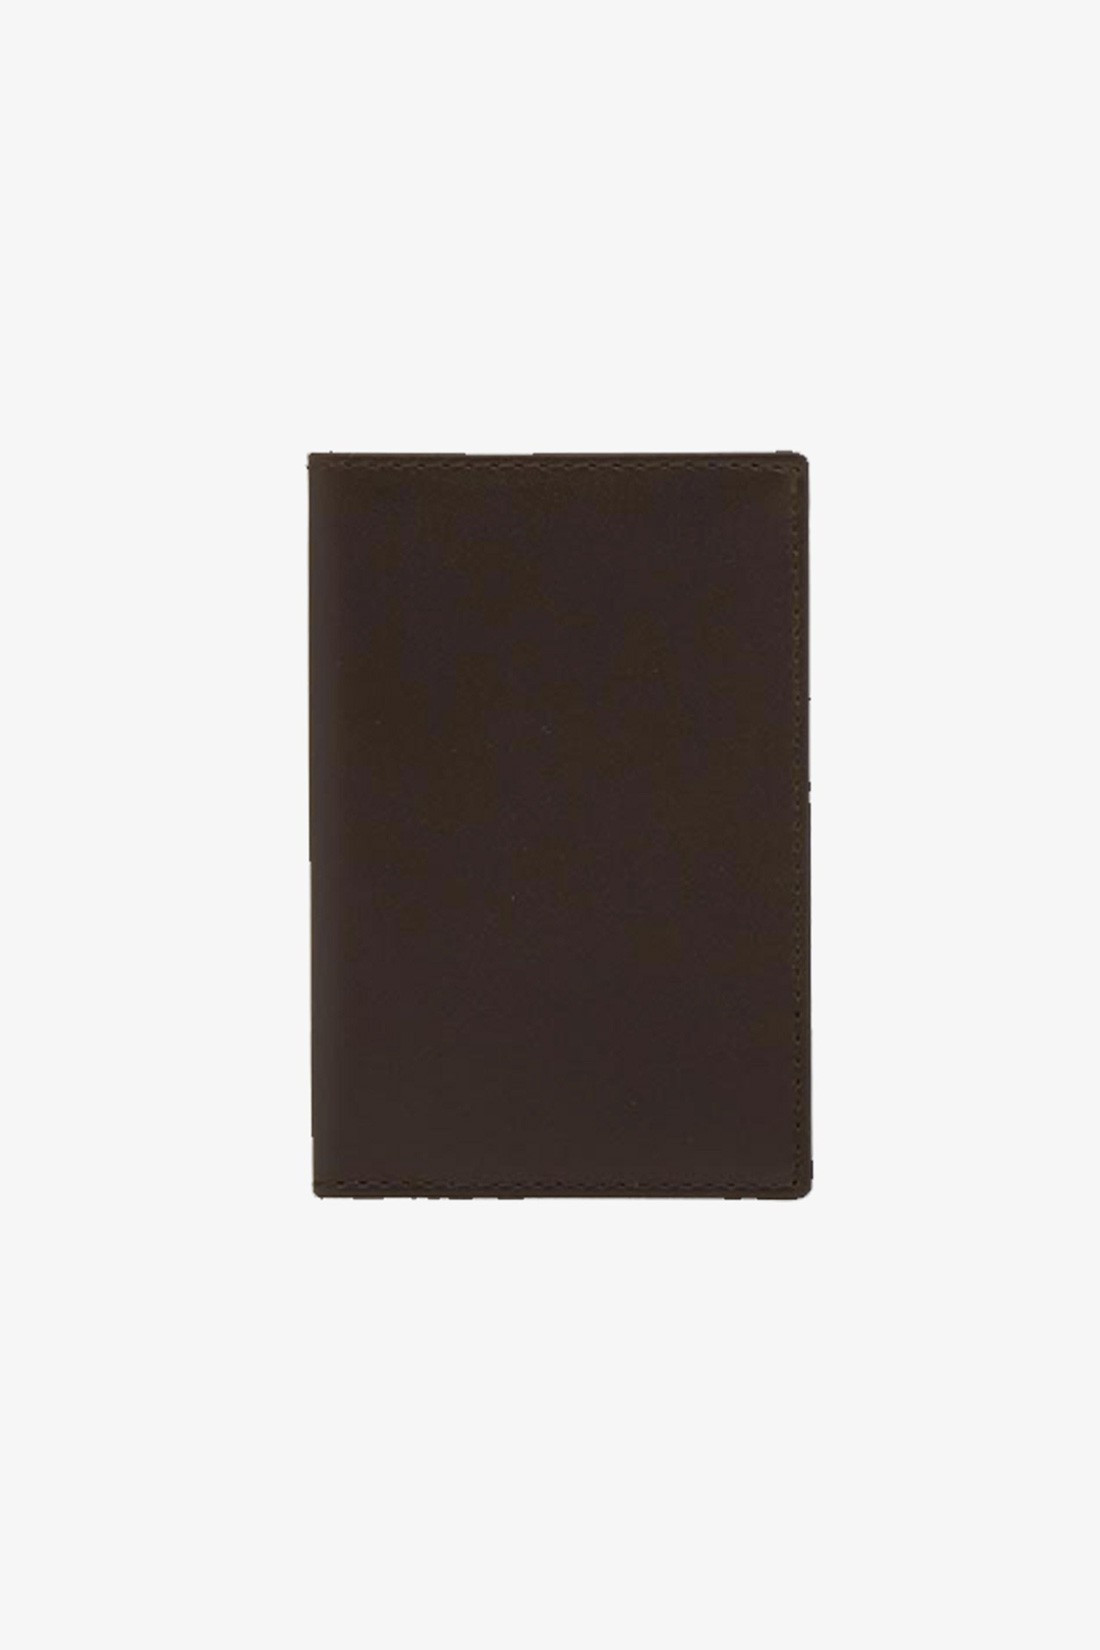 Cdg leather wallet classic Brown